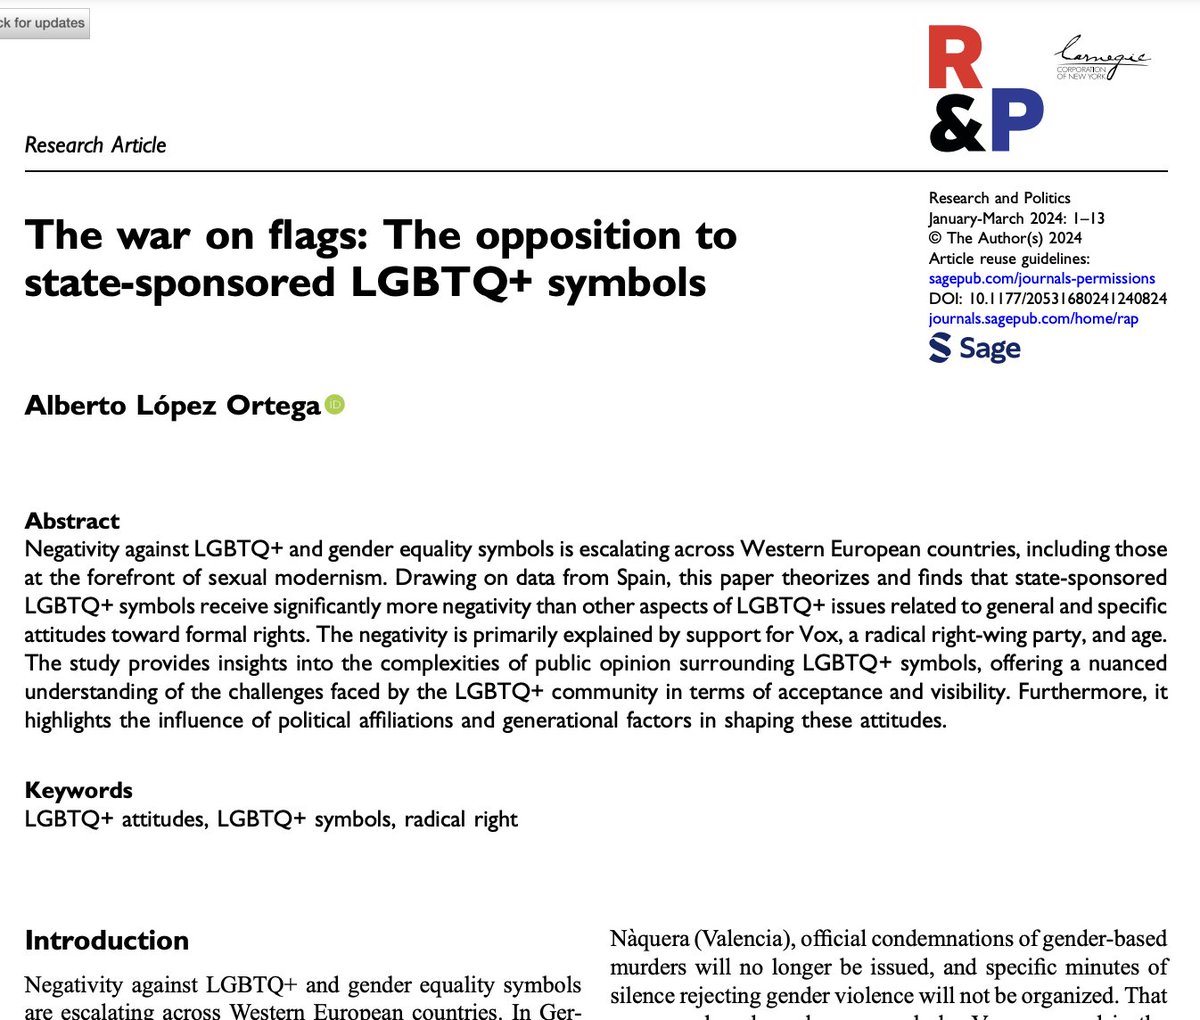 New paper: Why, as Western European countries grow more tolerant of LGBTQ+ rights, do we see an increase in attacks on LGBTQ+ flags? In my paper, I explain and provide evidence of hostility against state-sponsored symbolism in 🇪🇸: journals.sagepub.com/doi/epub/10.11…